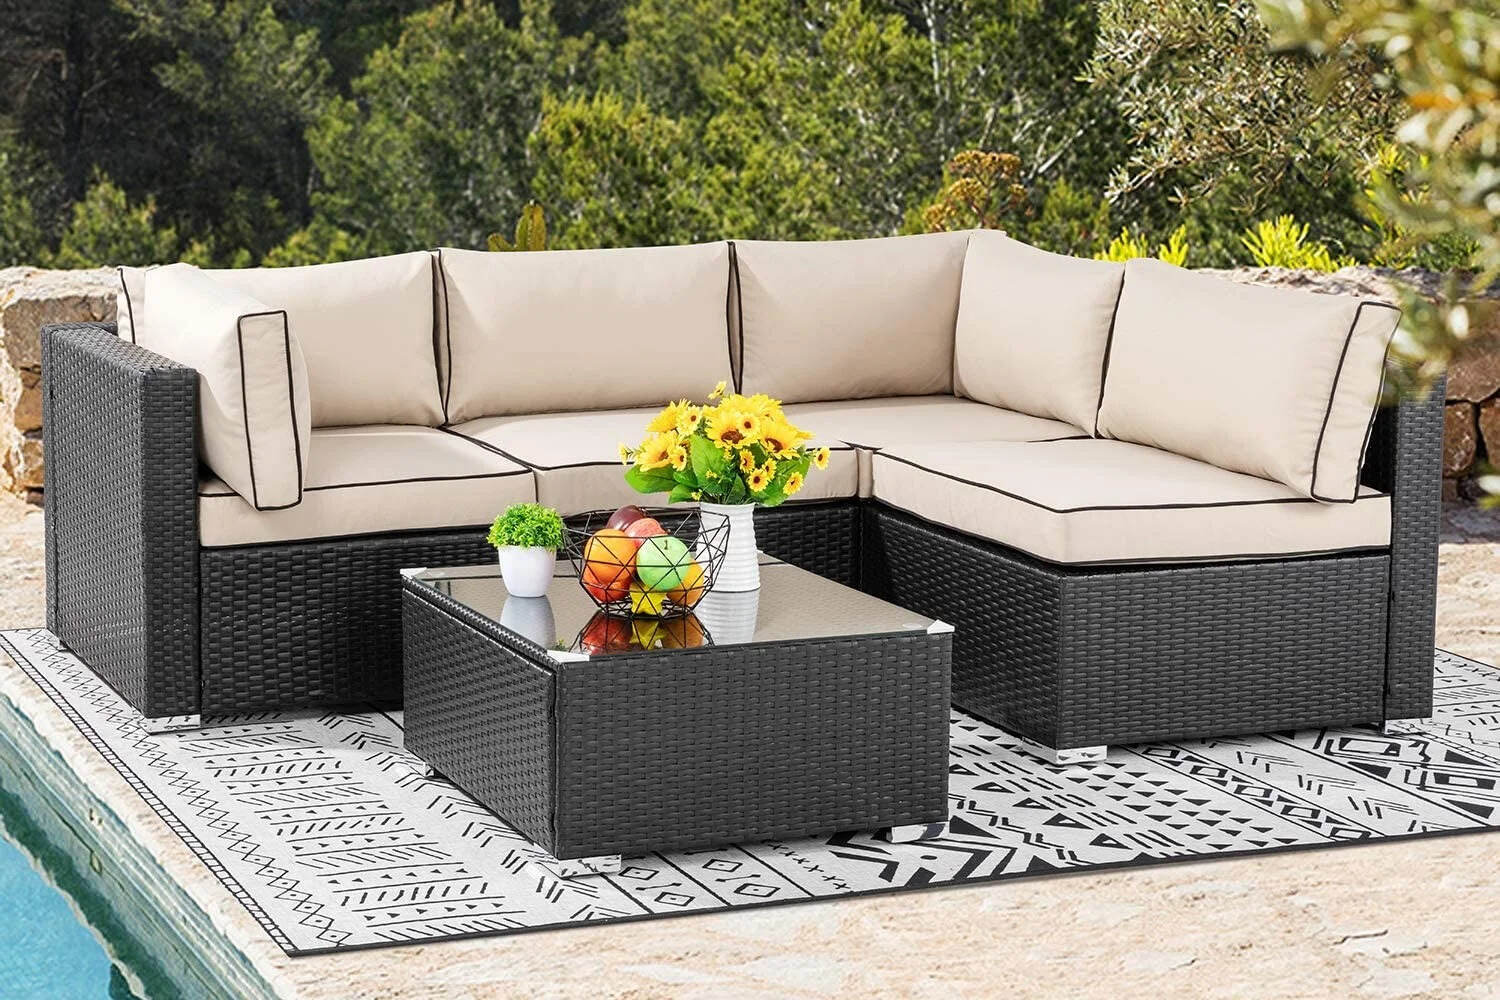 What To Look For In Patio Furniture